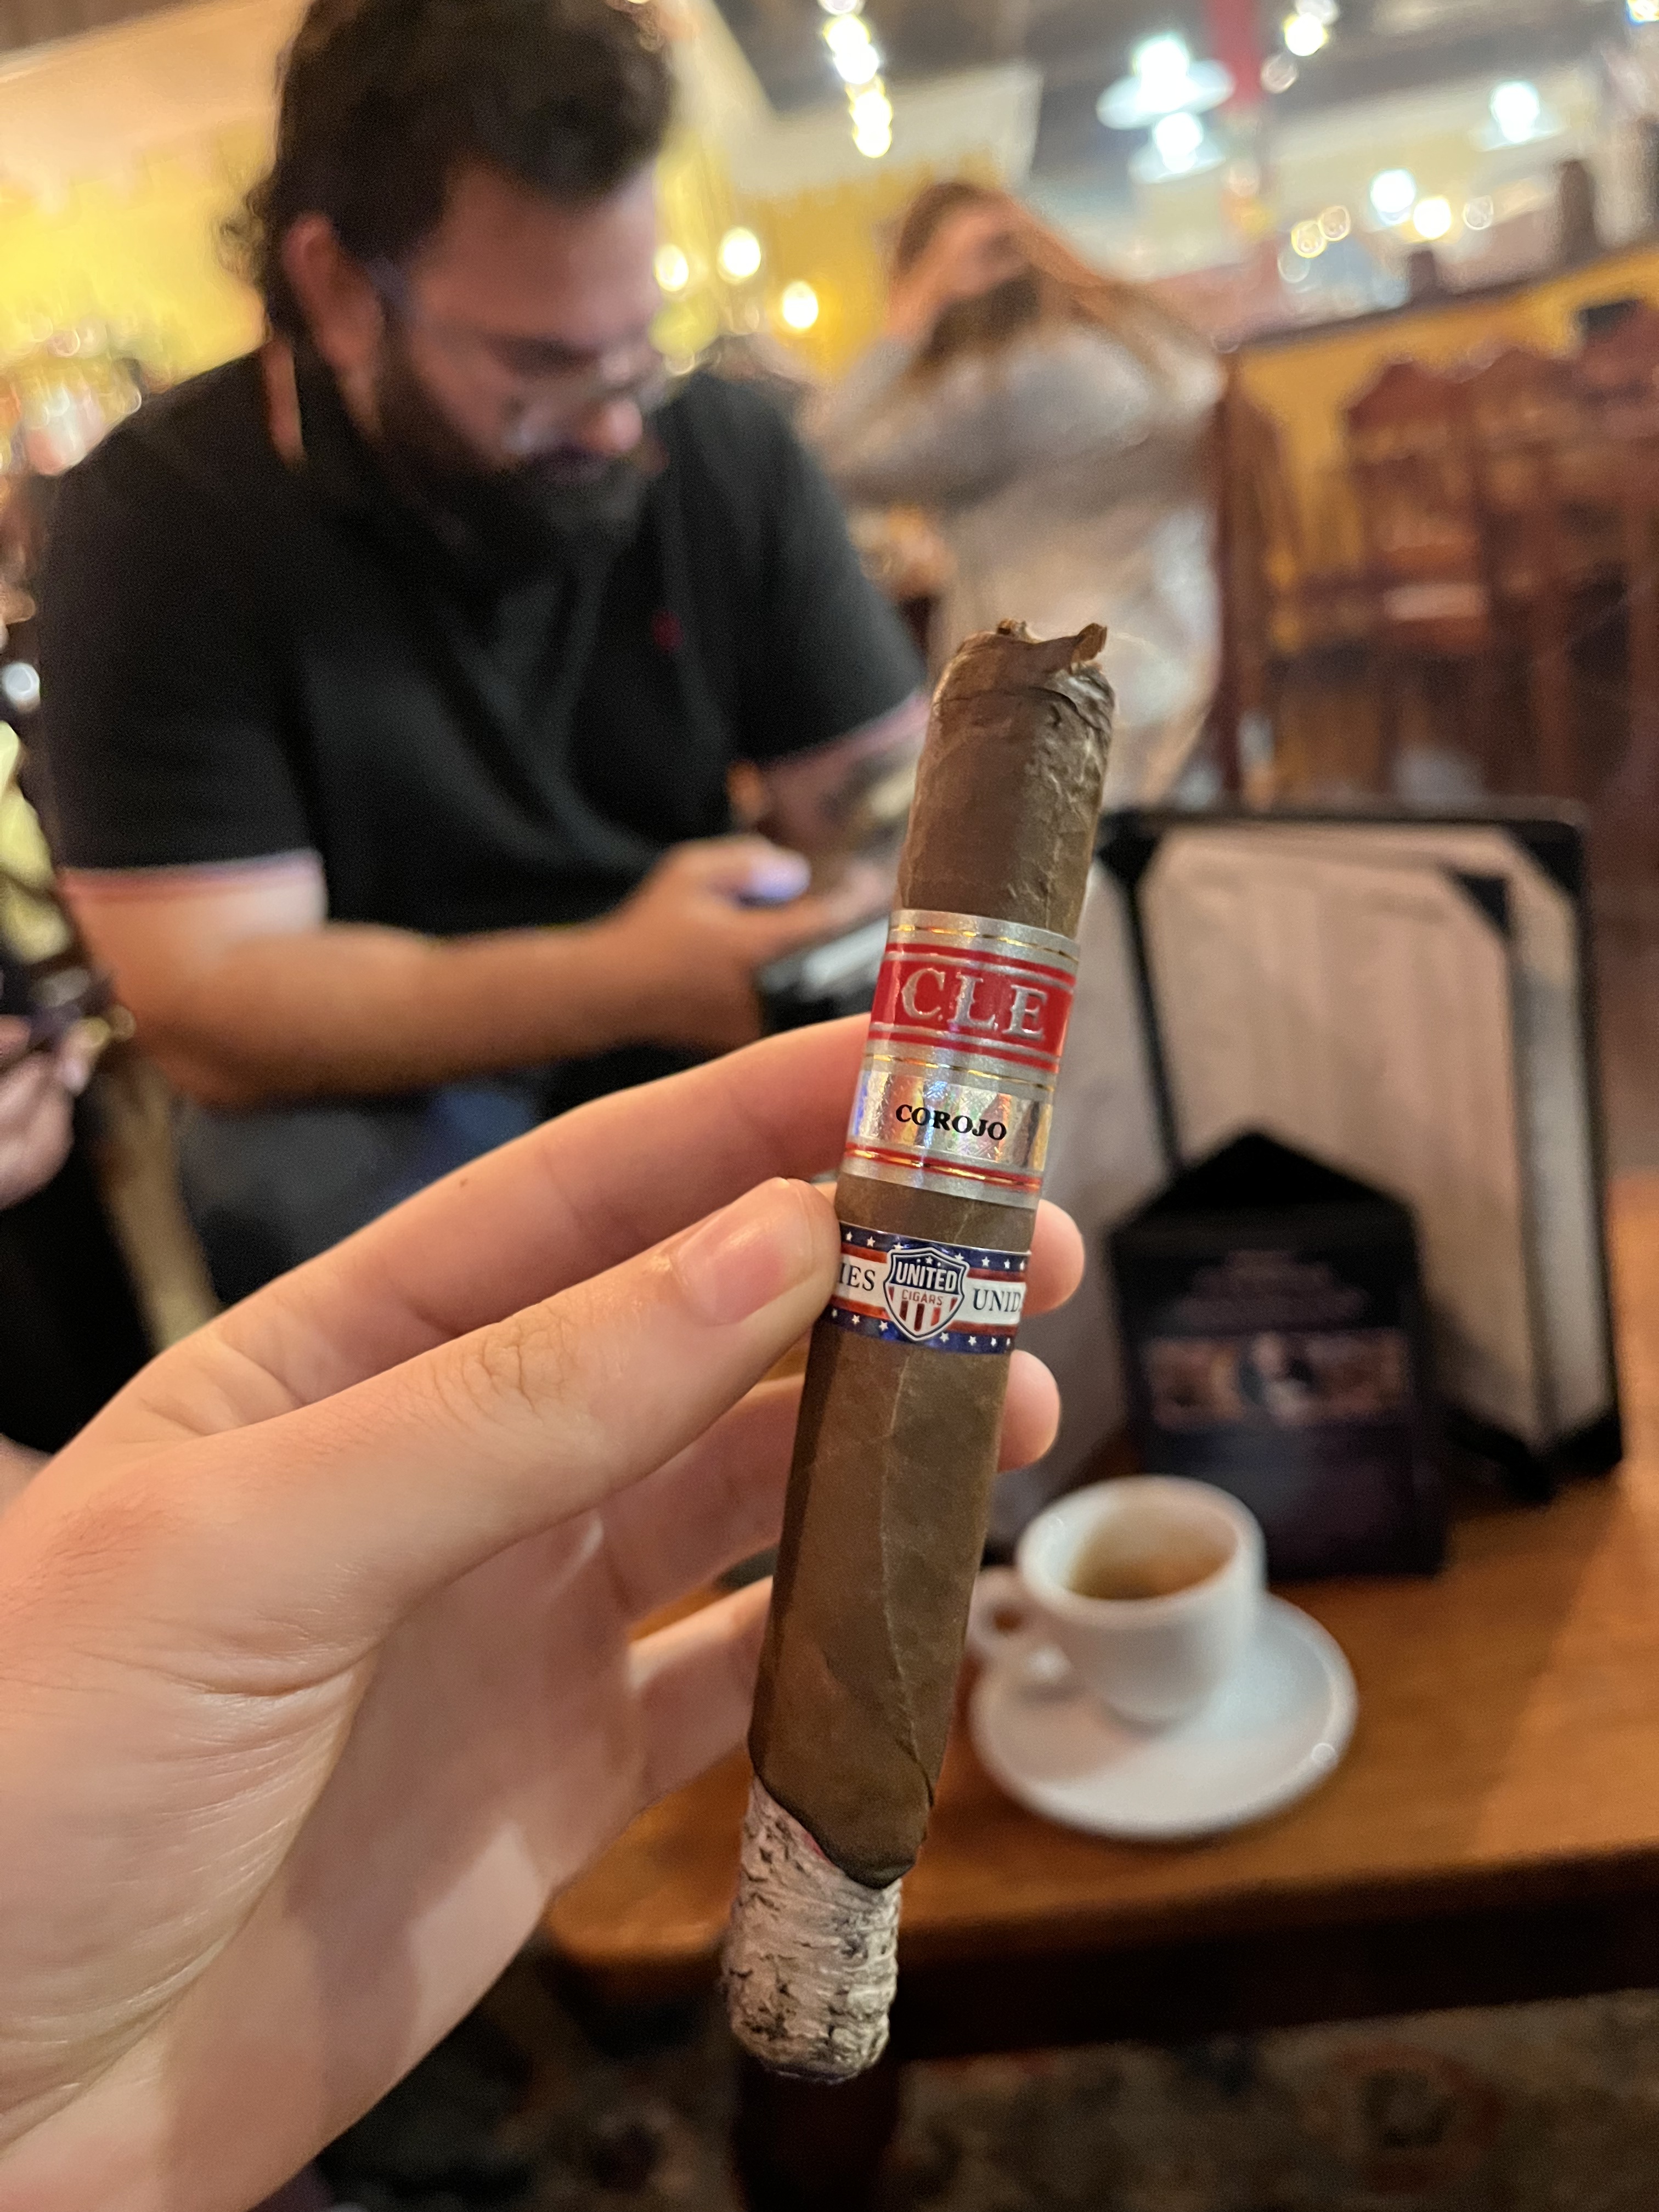 CLE Corojo by United Cigars